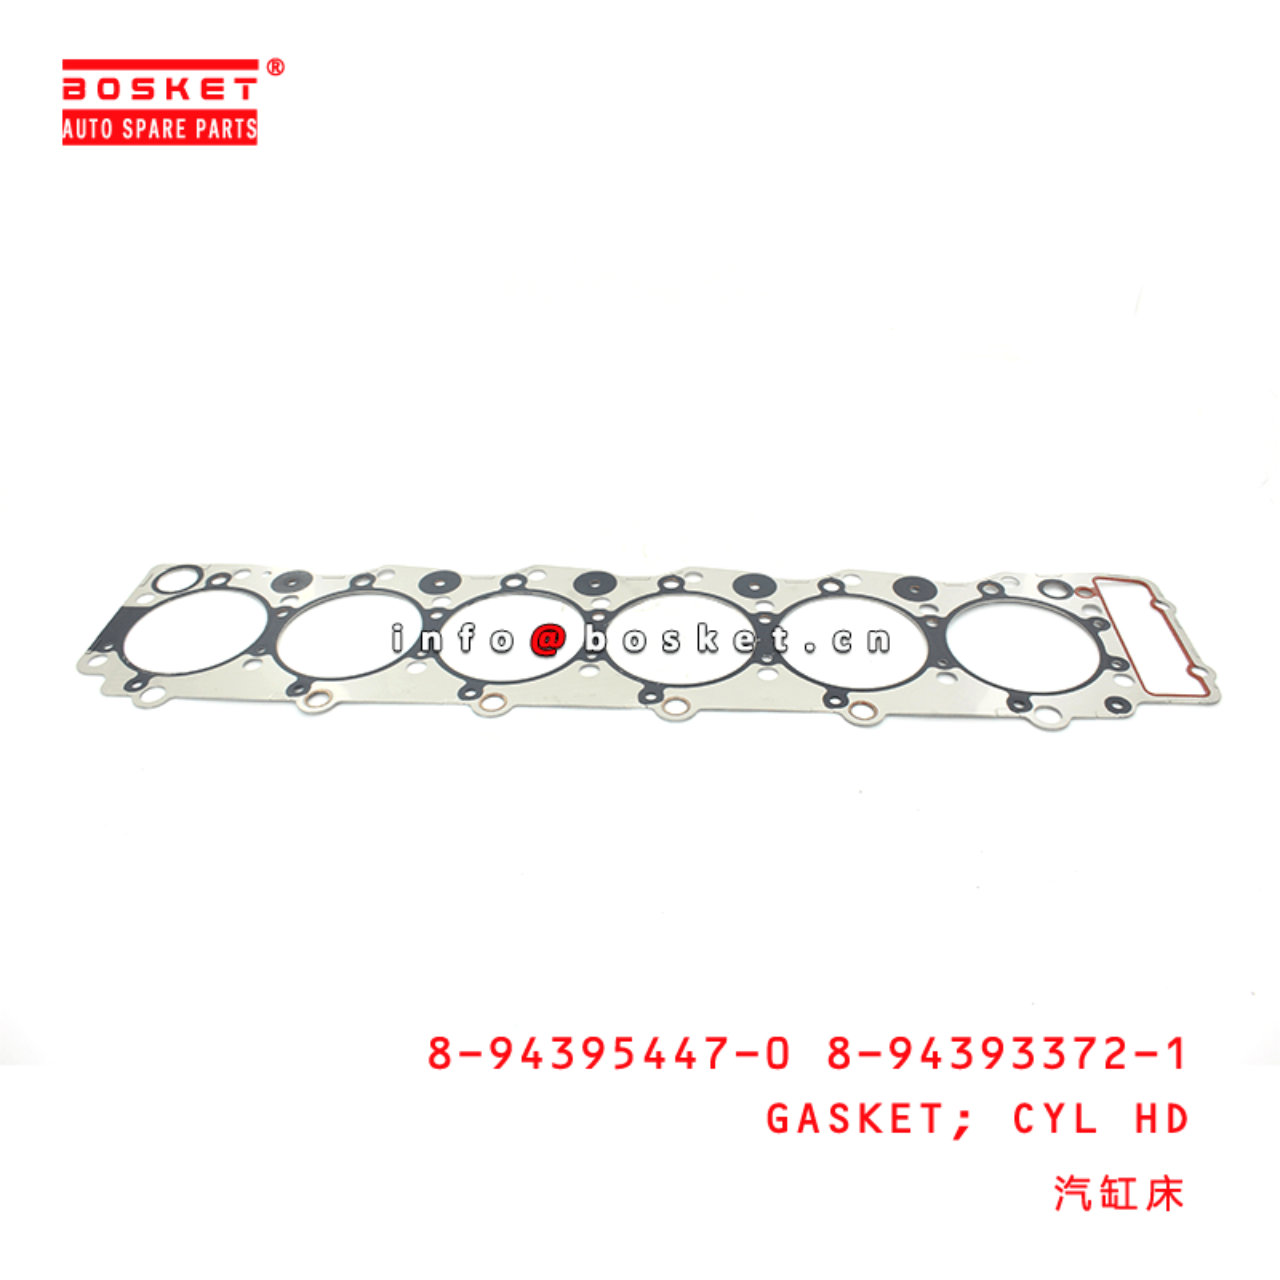 8-94395447-0 8-94393372-1 Cylinder Head Gasket 8943954470 8943933721 Suitable for ISUZU FVR32 6HE1T